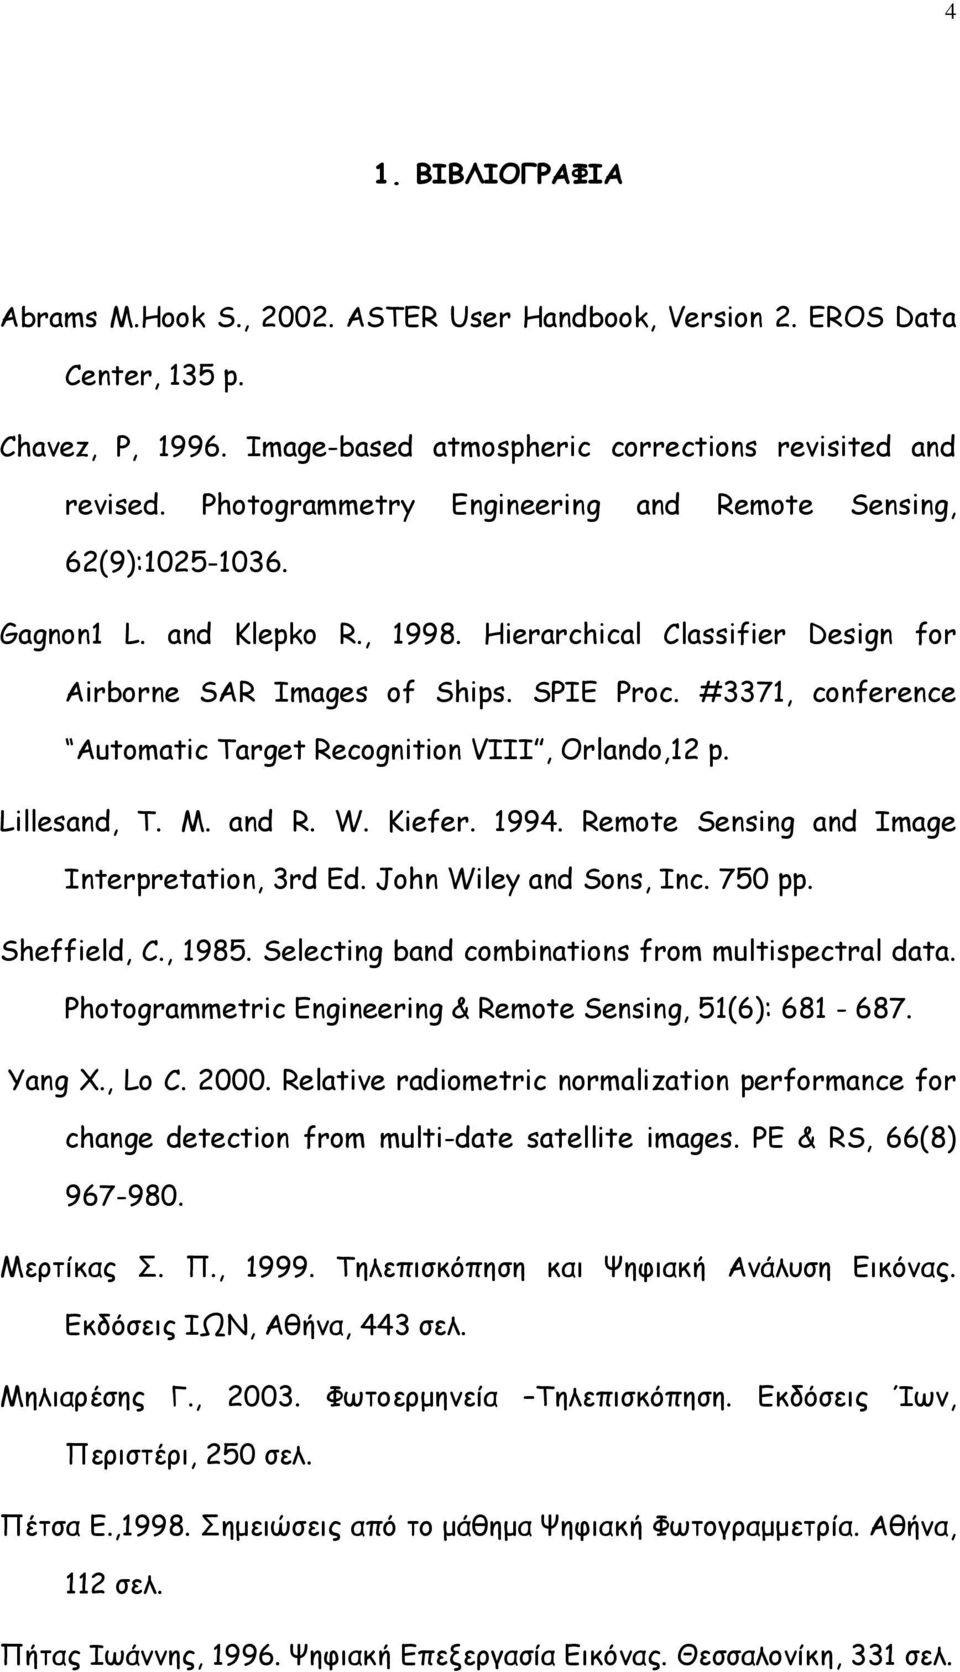 #3371, conference Automatic Target Recognition VIII, Orlando,12 p. Lillesand, T. M. and R. W. Kiefer. 1994. Remote Sensing and Image Interpretation, 3rd Ed. John Wiley and Sons, Inc. 750 pp.